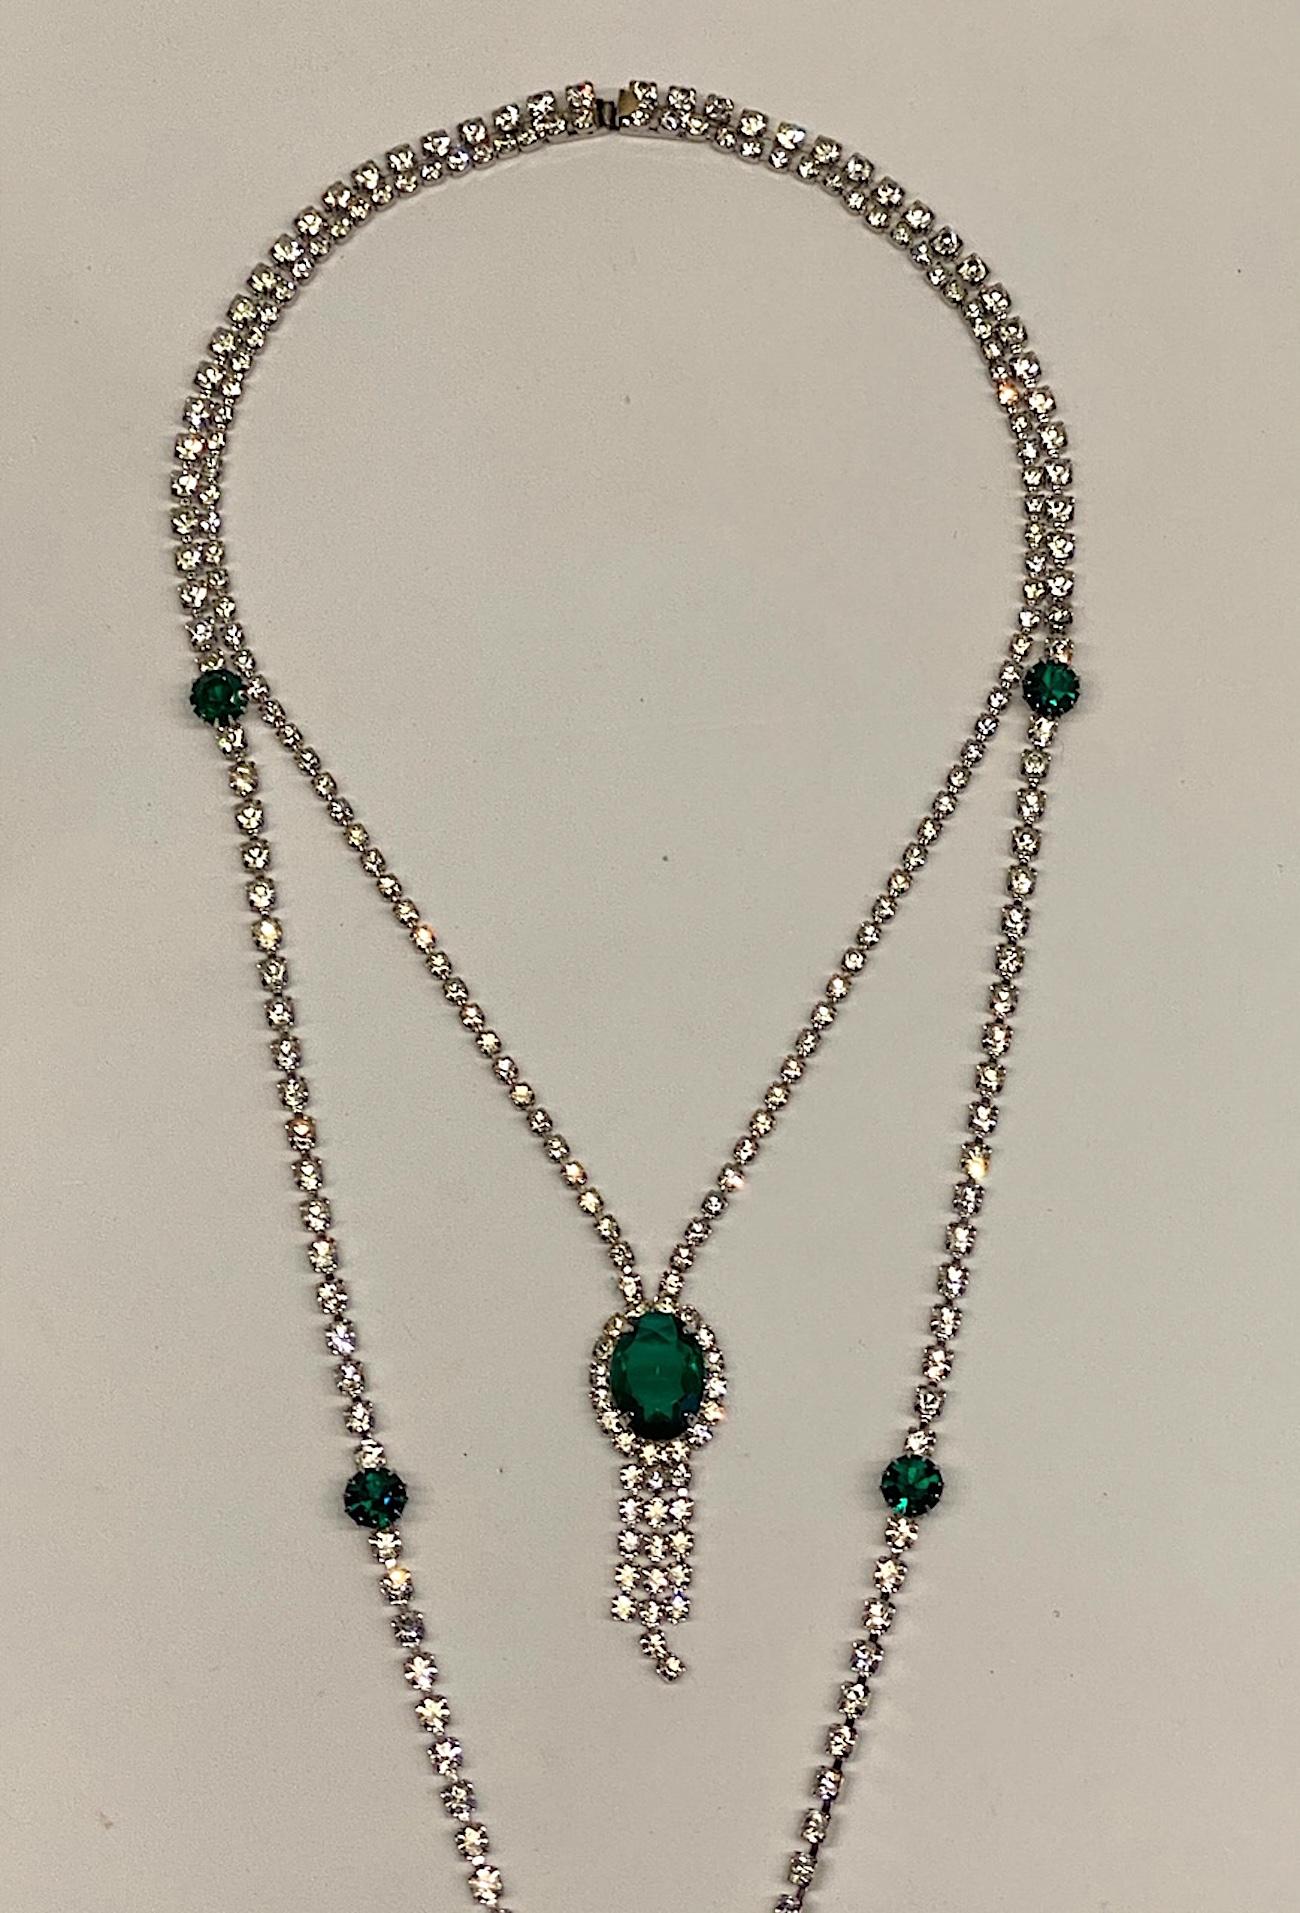 1950s / 1960s Emerald Green Crystal & Rhinestone Double Pendant Necklace 10